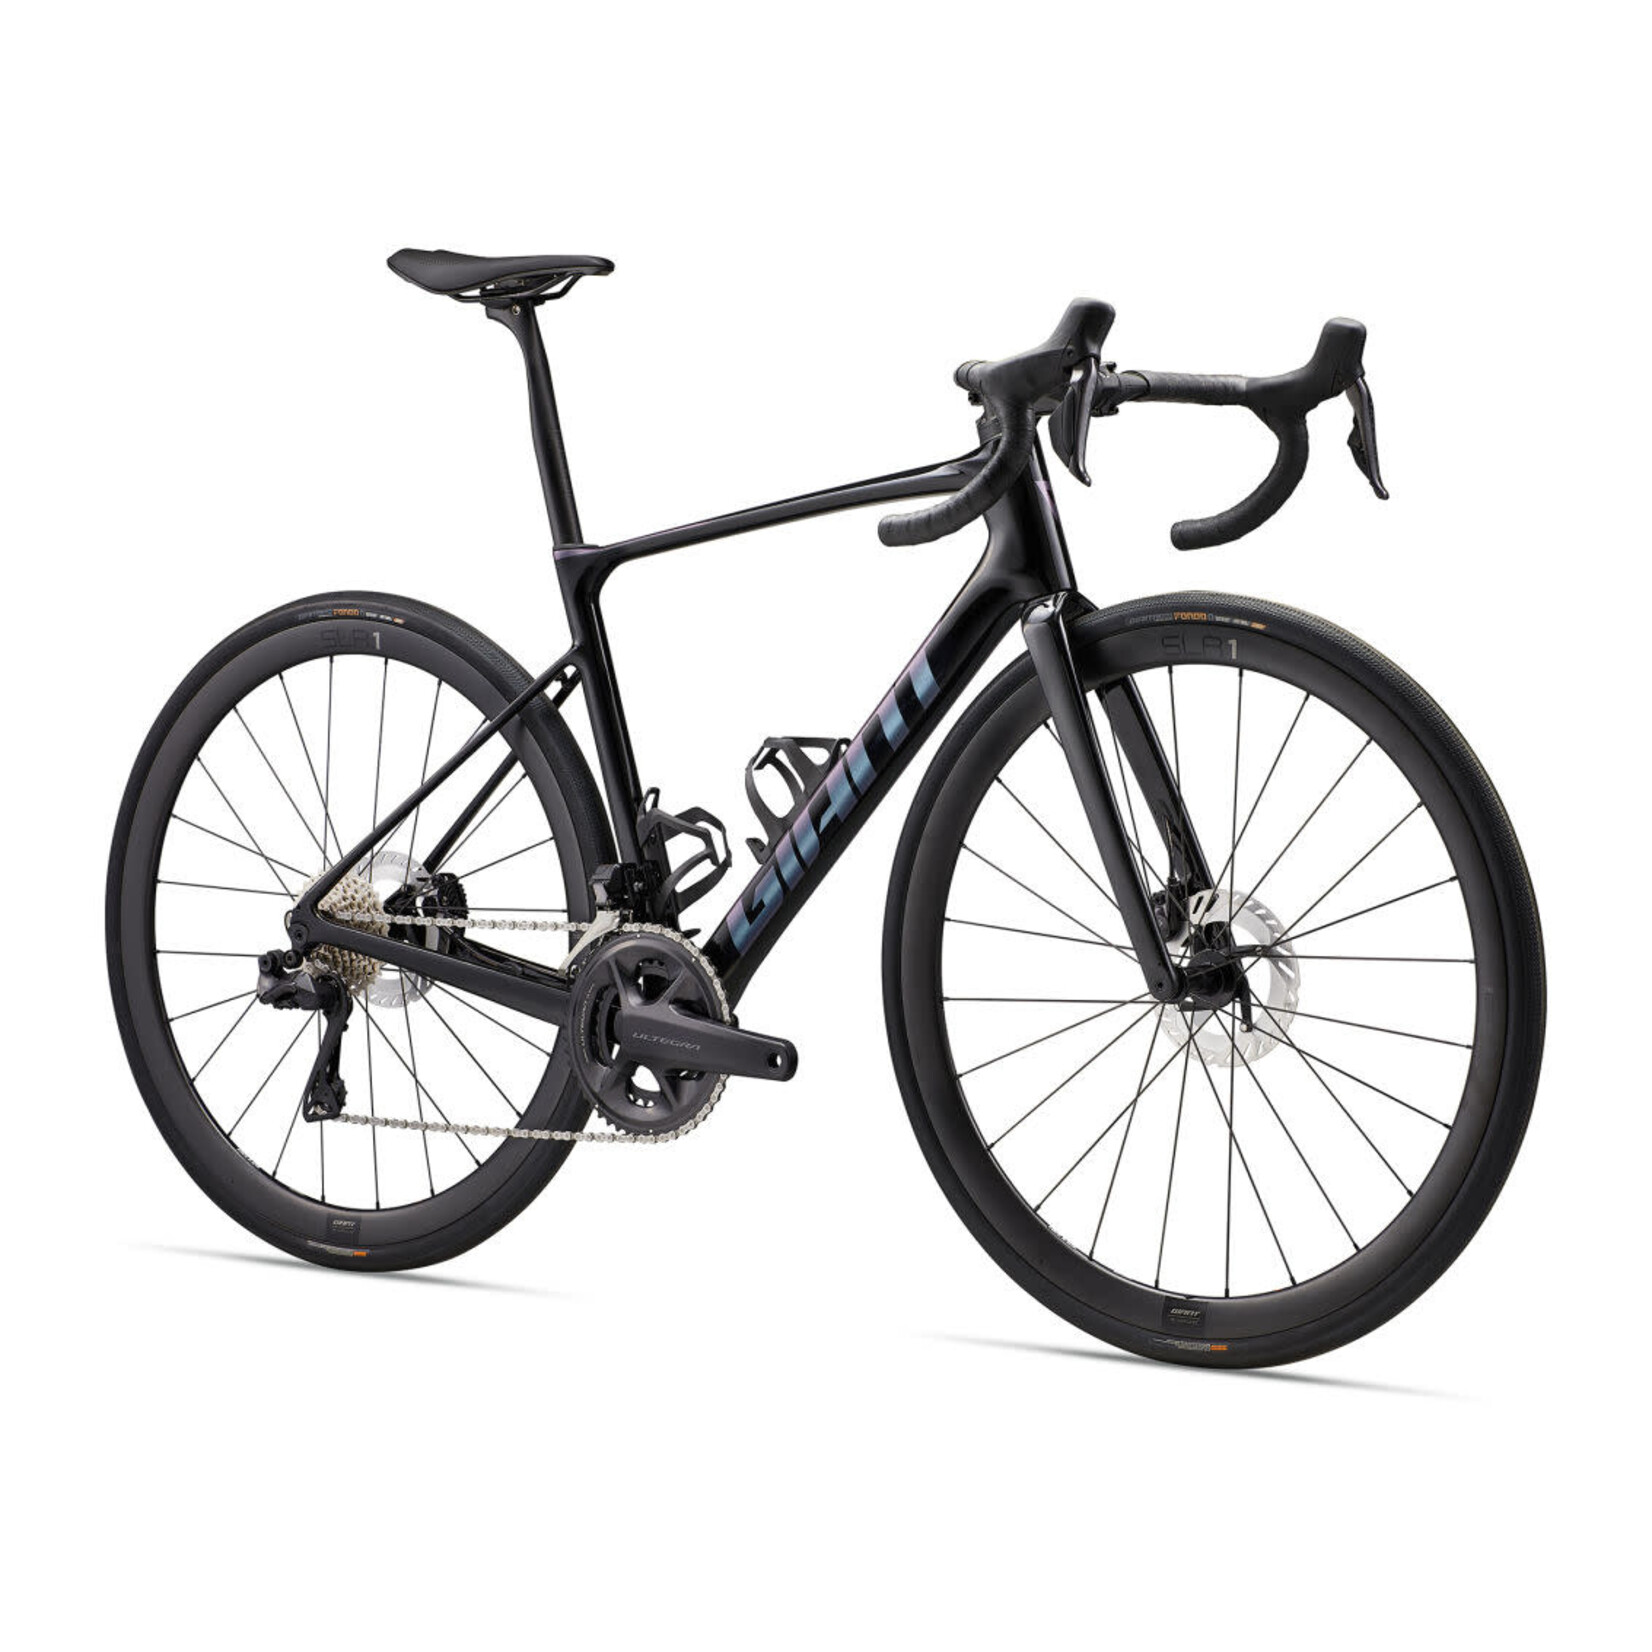 GIANT Defy Advanced Pro 0 - Carbon/Blue Dragonfly